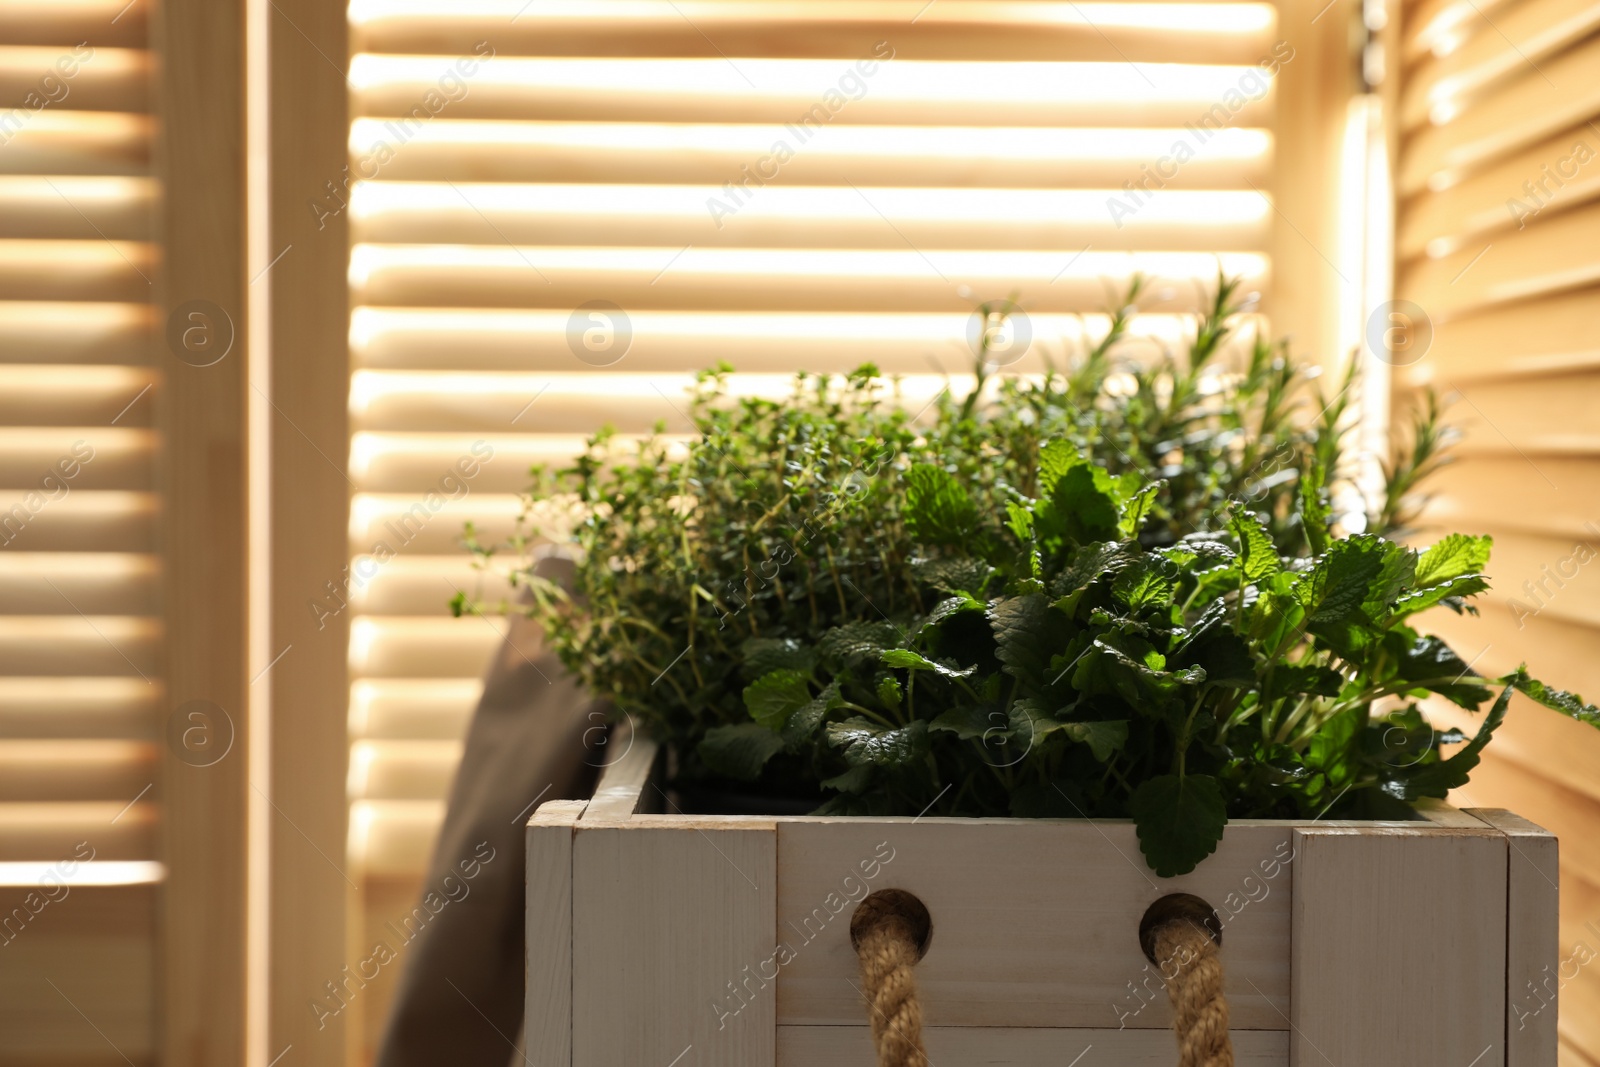 Photo of Wooden crate with different potted herbs indoors